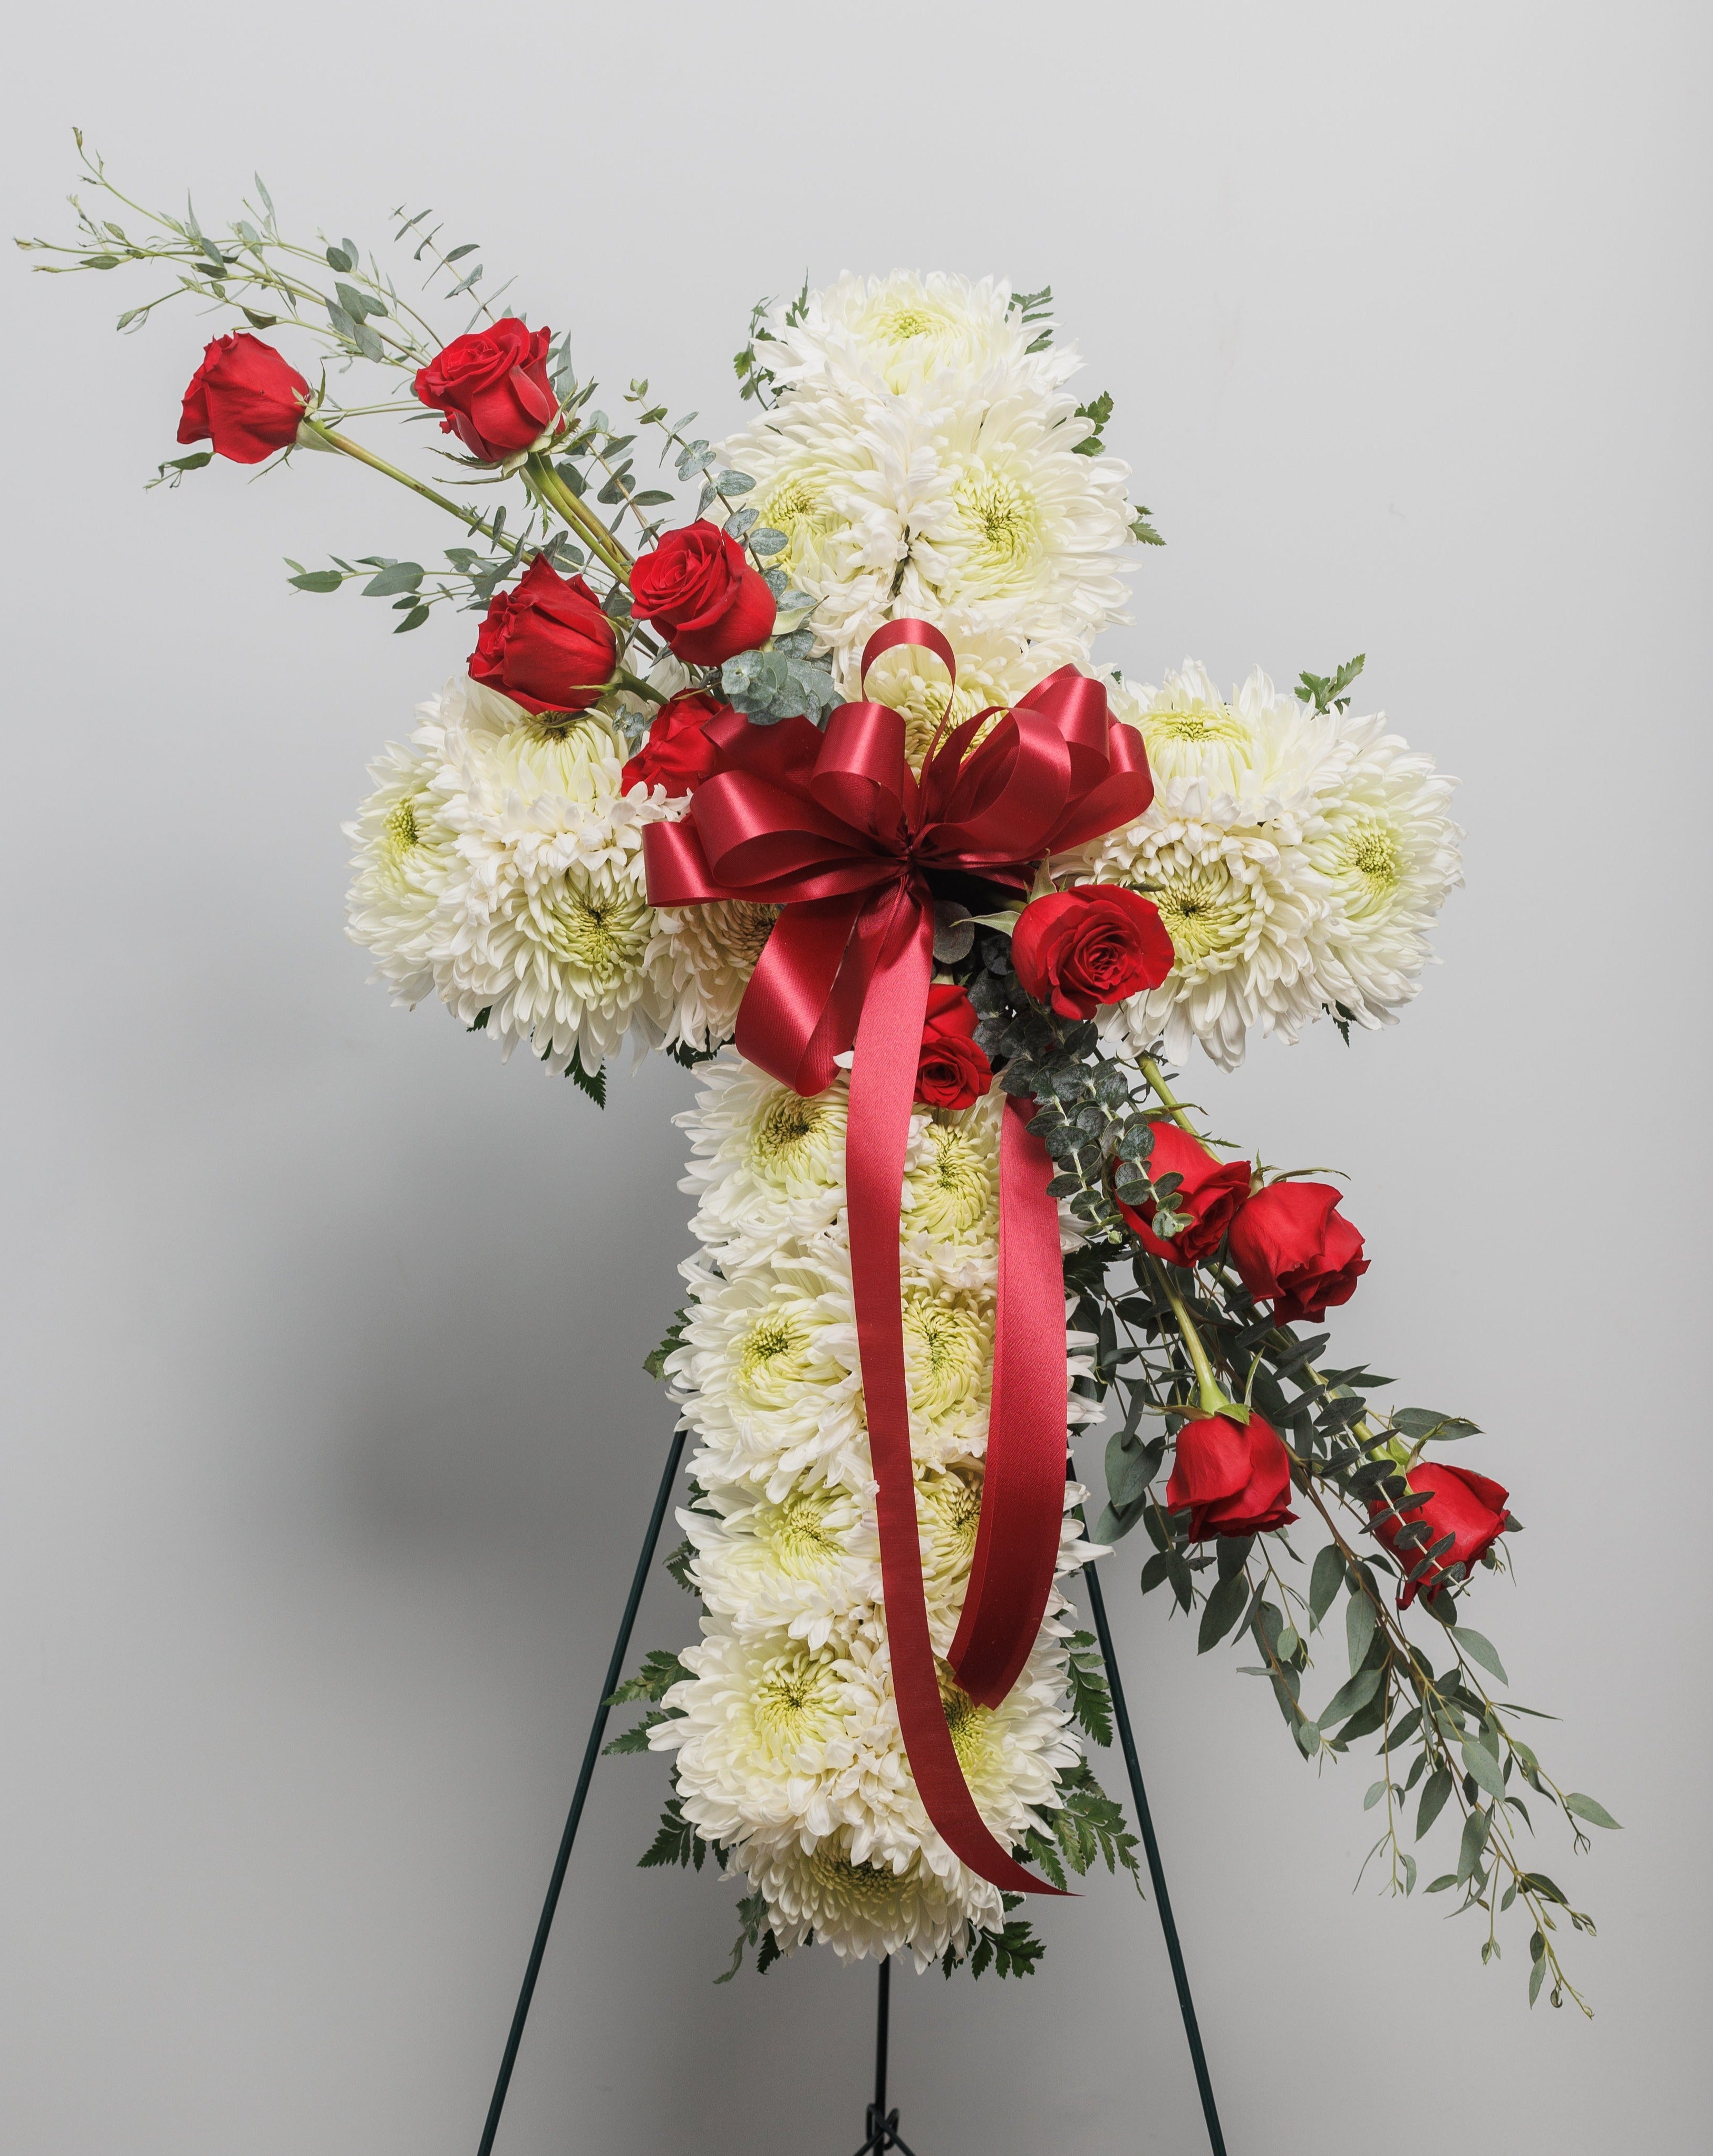 A cross spray with white mums and red roses.